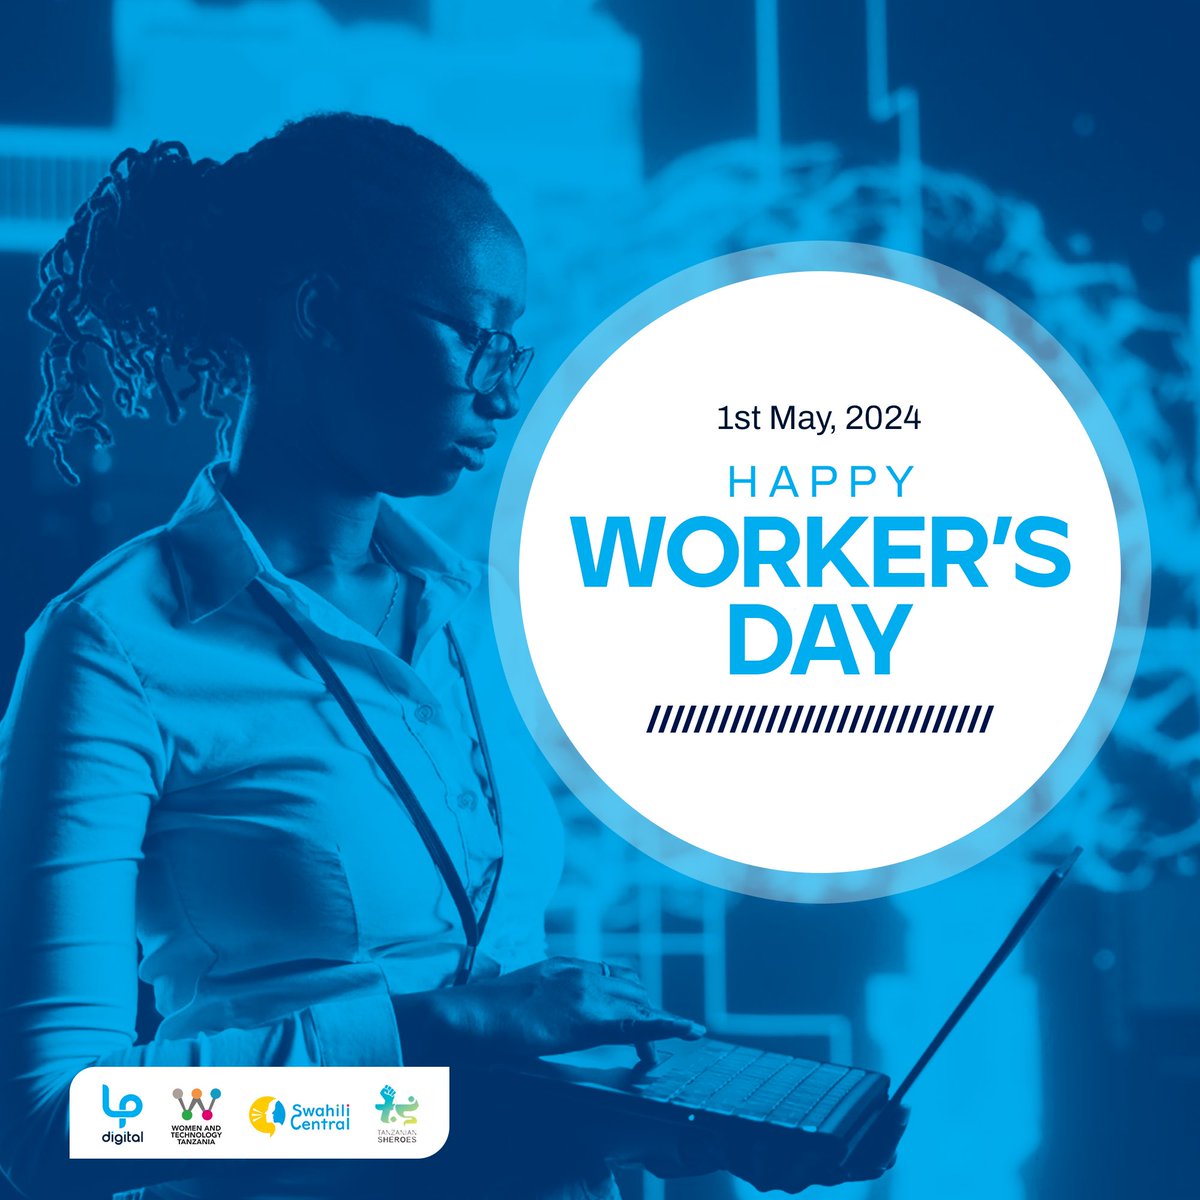 Happy Workers' Day! 

Today we celebrate the tireless efforts and achievements of workers worldwide. Your dedication makes a difference!  

#MitandaoNaSisi #TechWomenTZ #tanzaniansheroes #hakizakidijitali #WorkersDay #LaborDay